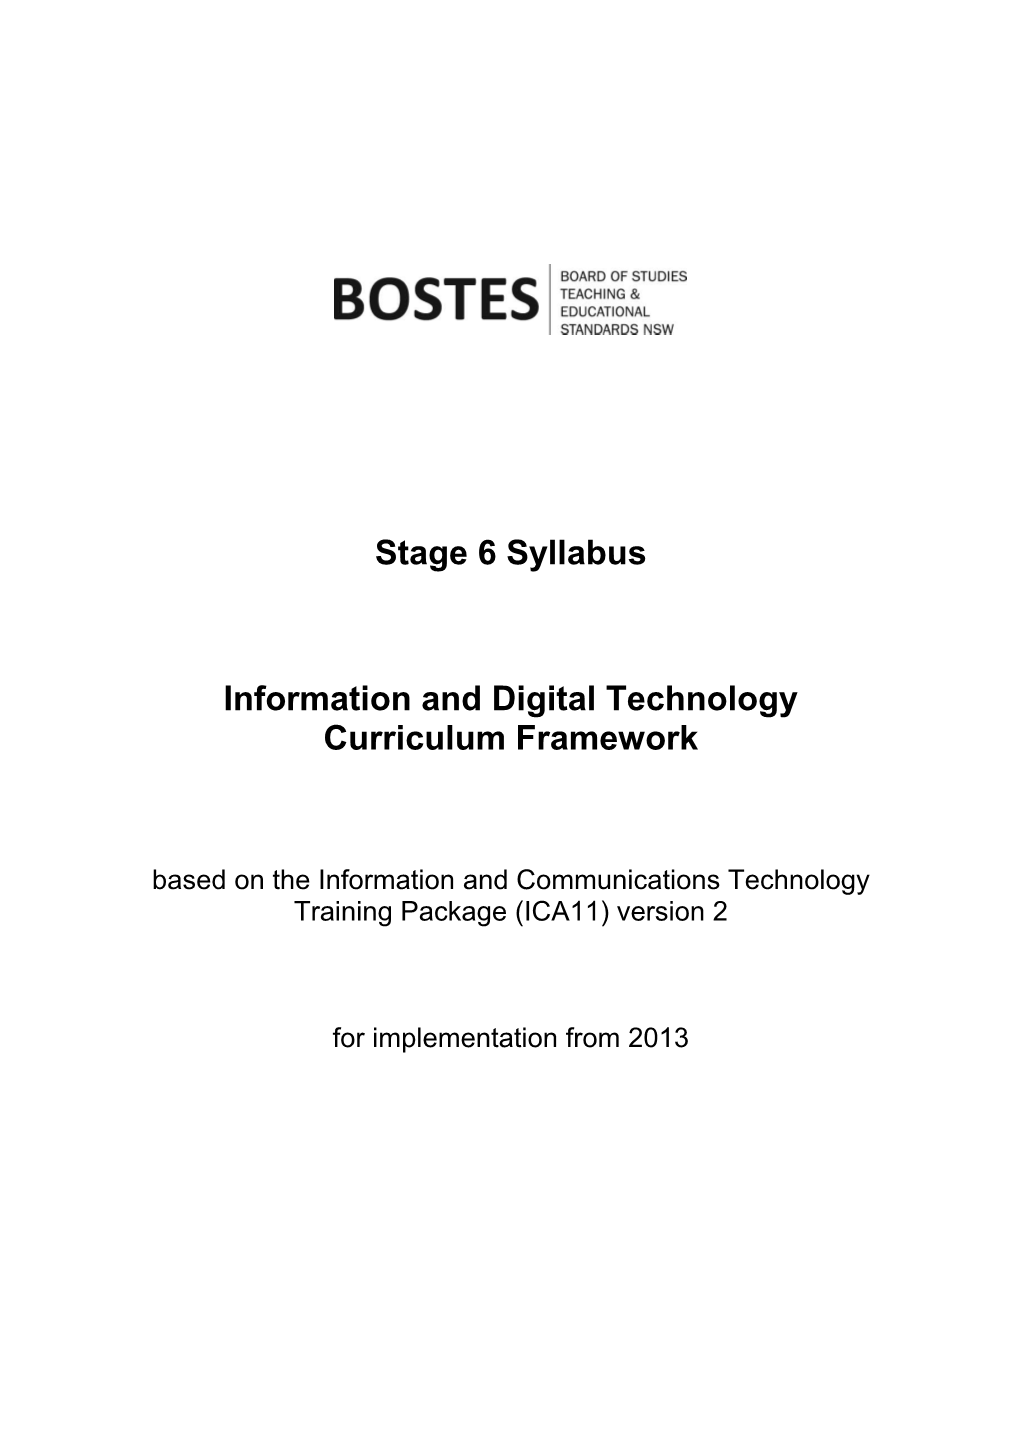 Information and Digital Technology Stage 6 Syllabus